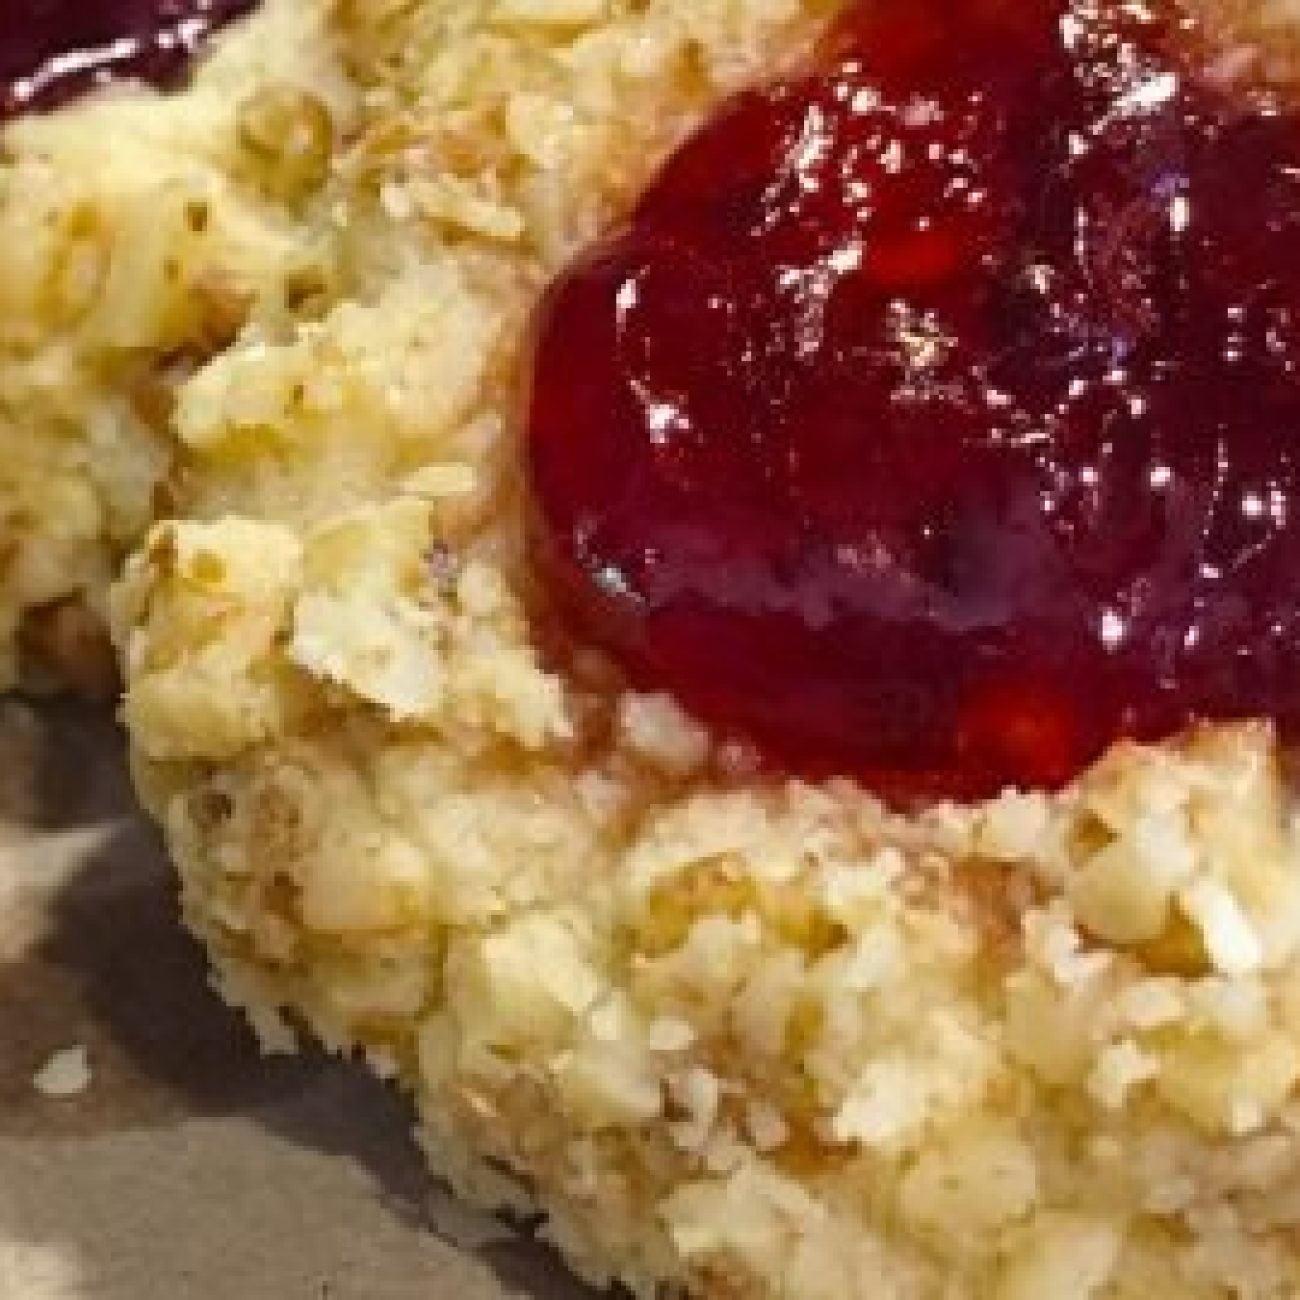 Red Currant Jelly Thumbprint Cookies